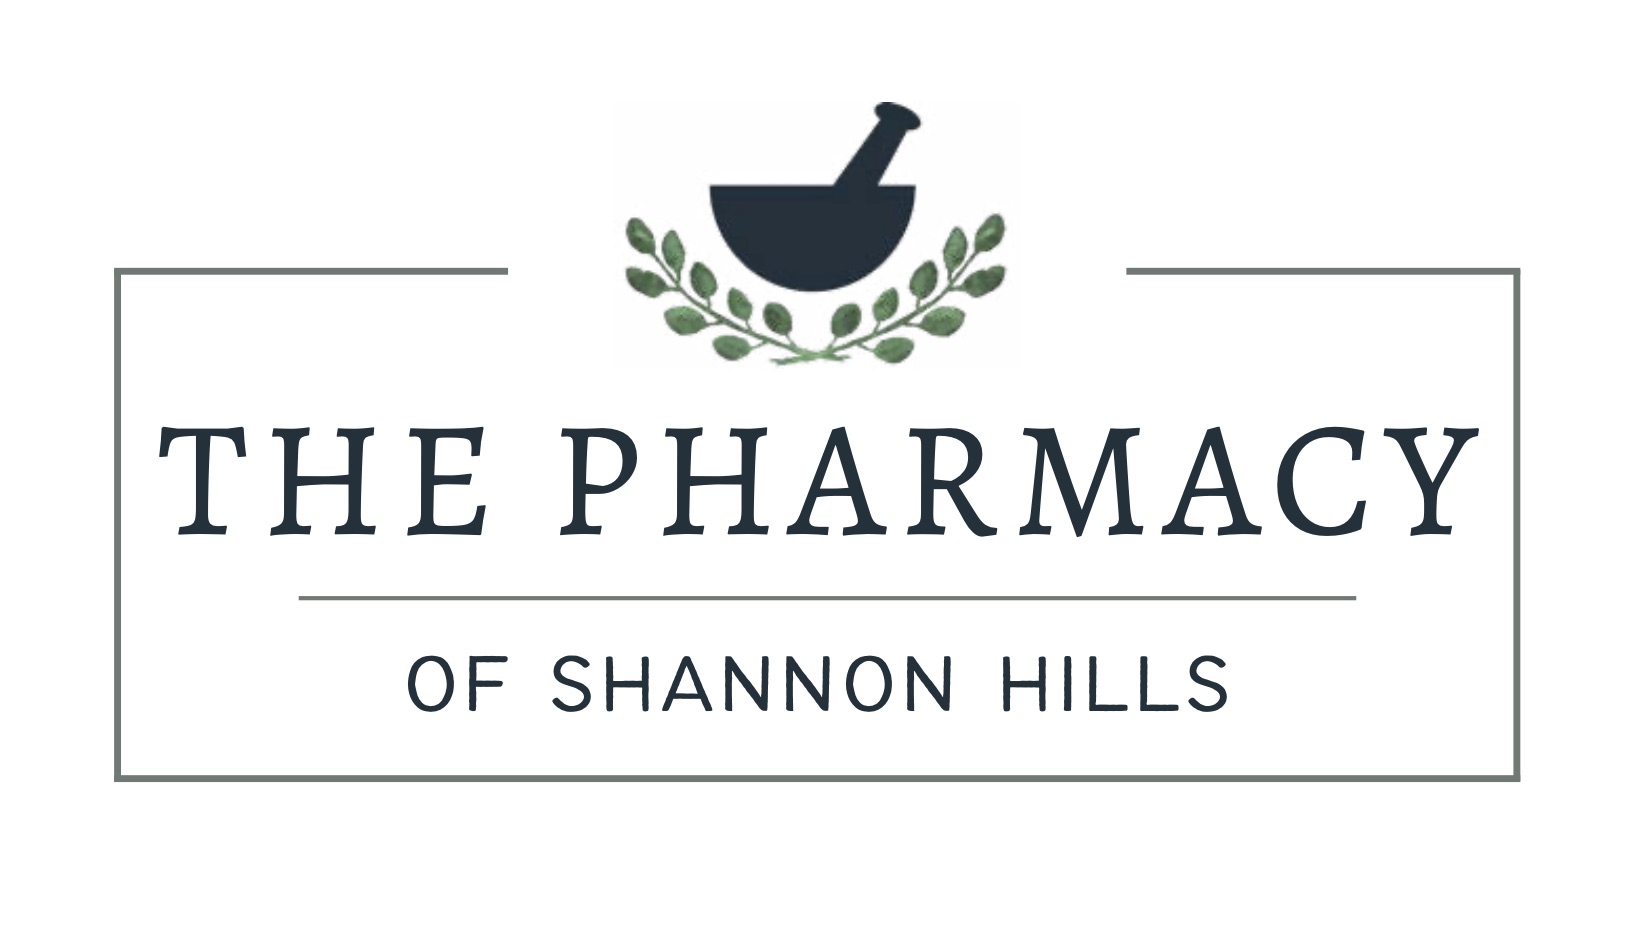 The Pharmacy of Shannon Hills